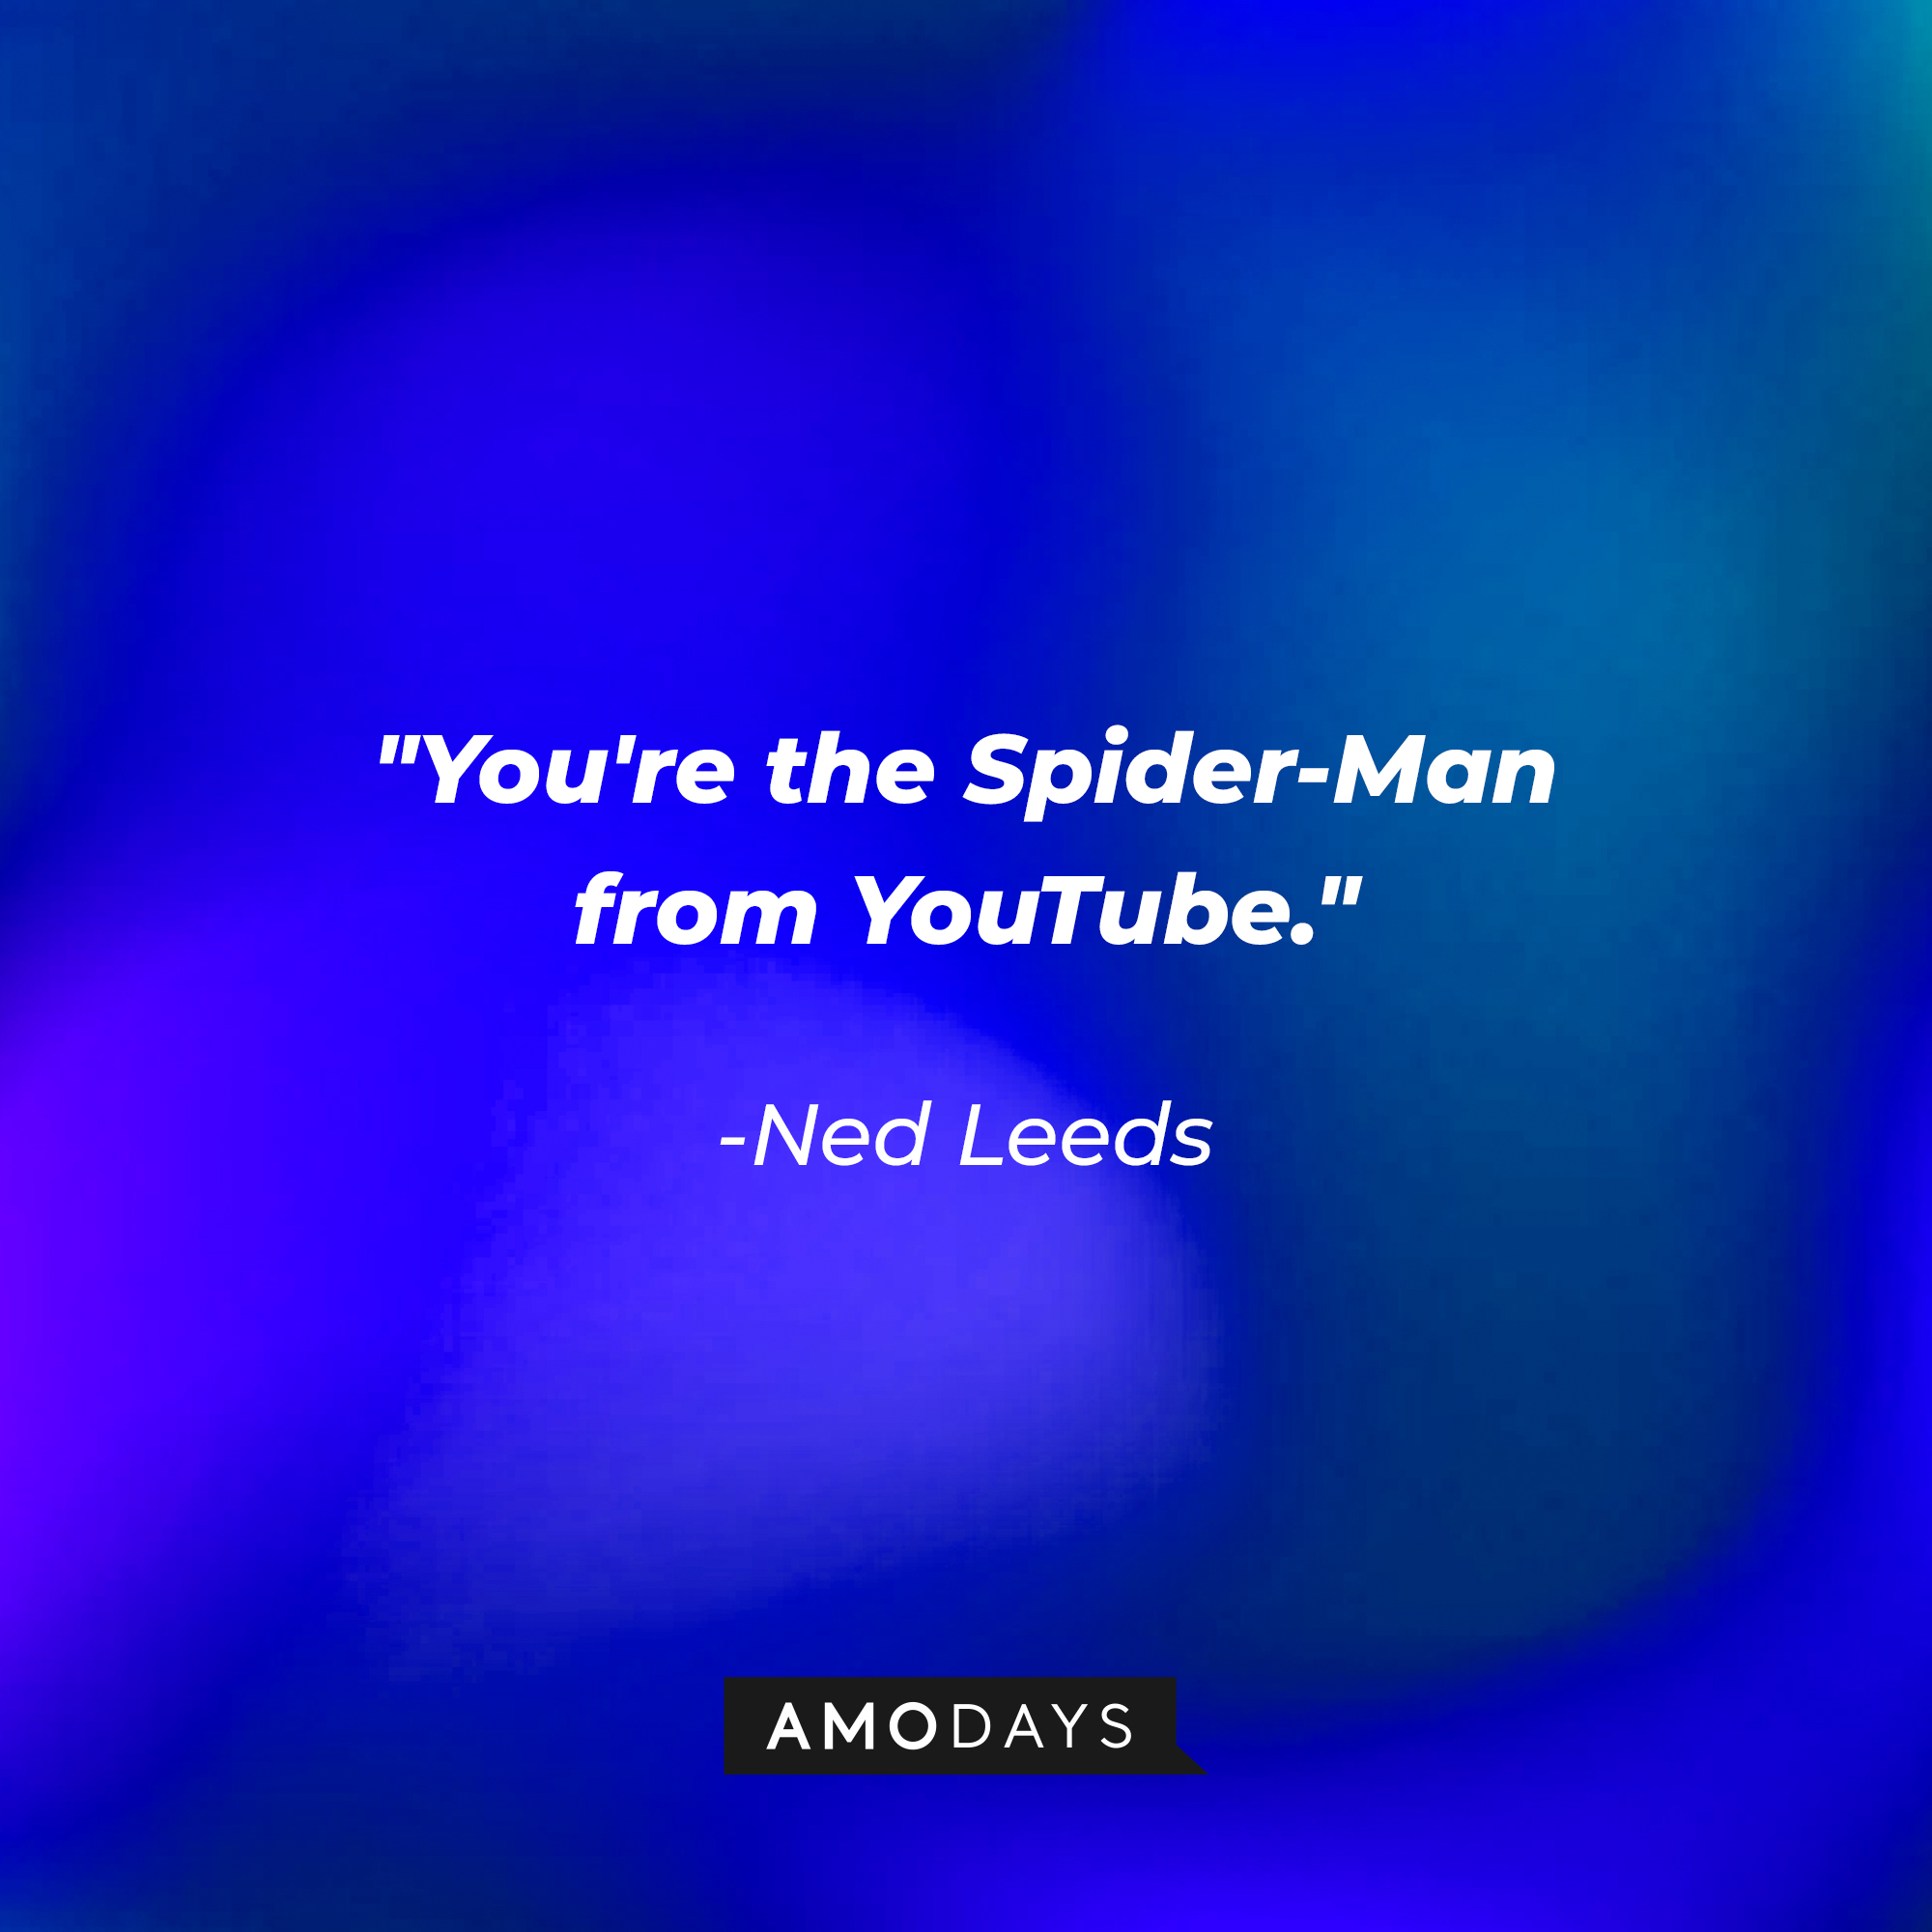 Ned Leeds’ quote: You're the Spider-Man from YouTube. | Image AmoDays